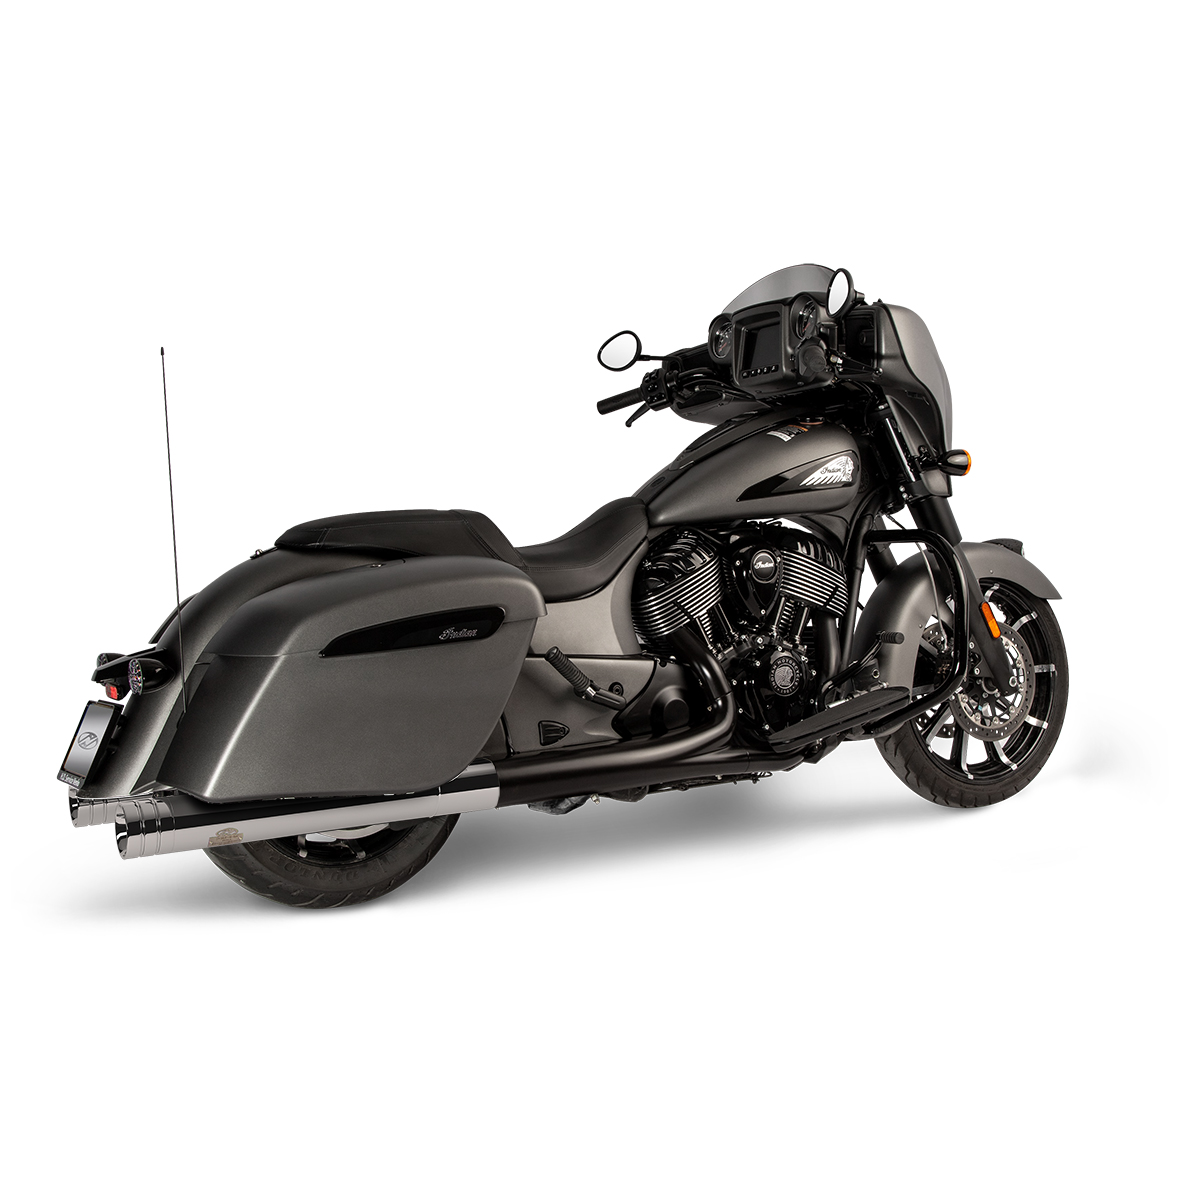 Jekill & Hyde Exhaust with Electronically Adjustable Noise Valve for 2019 Indian Chieftain, Roadmaster & Springfield Models